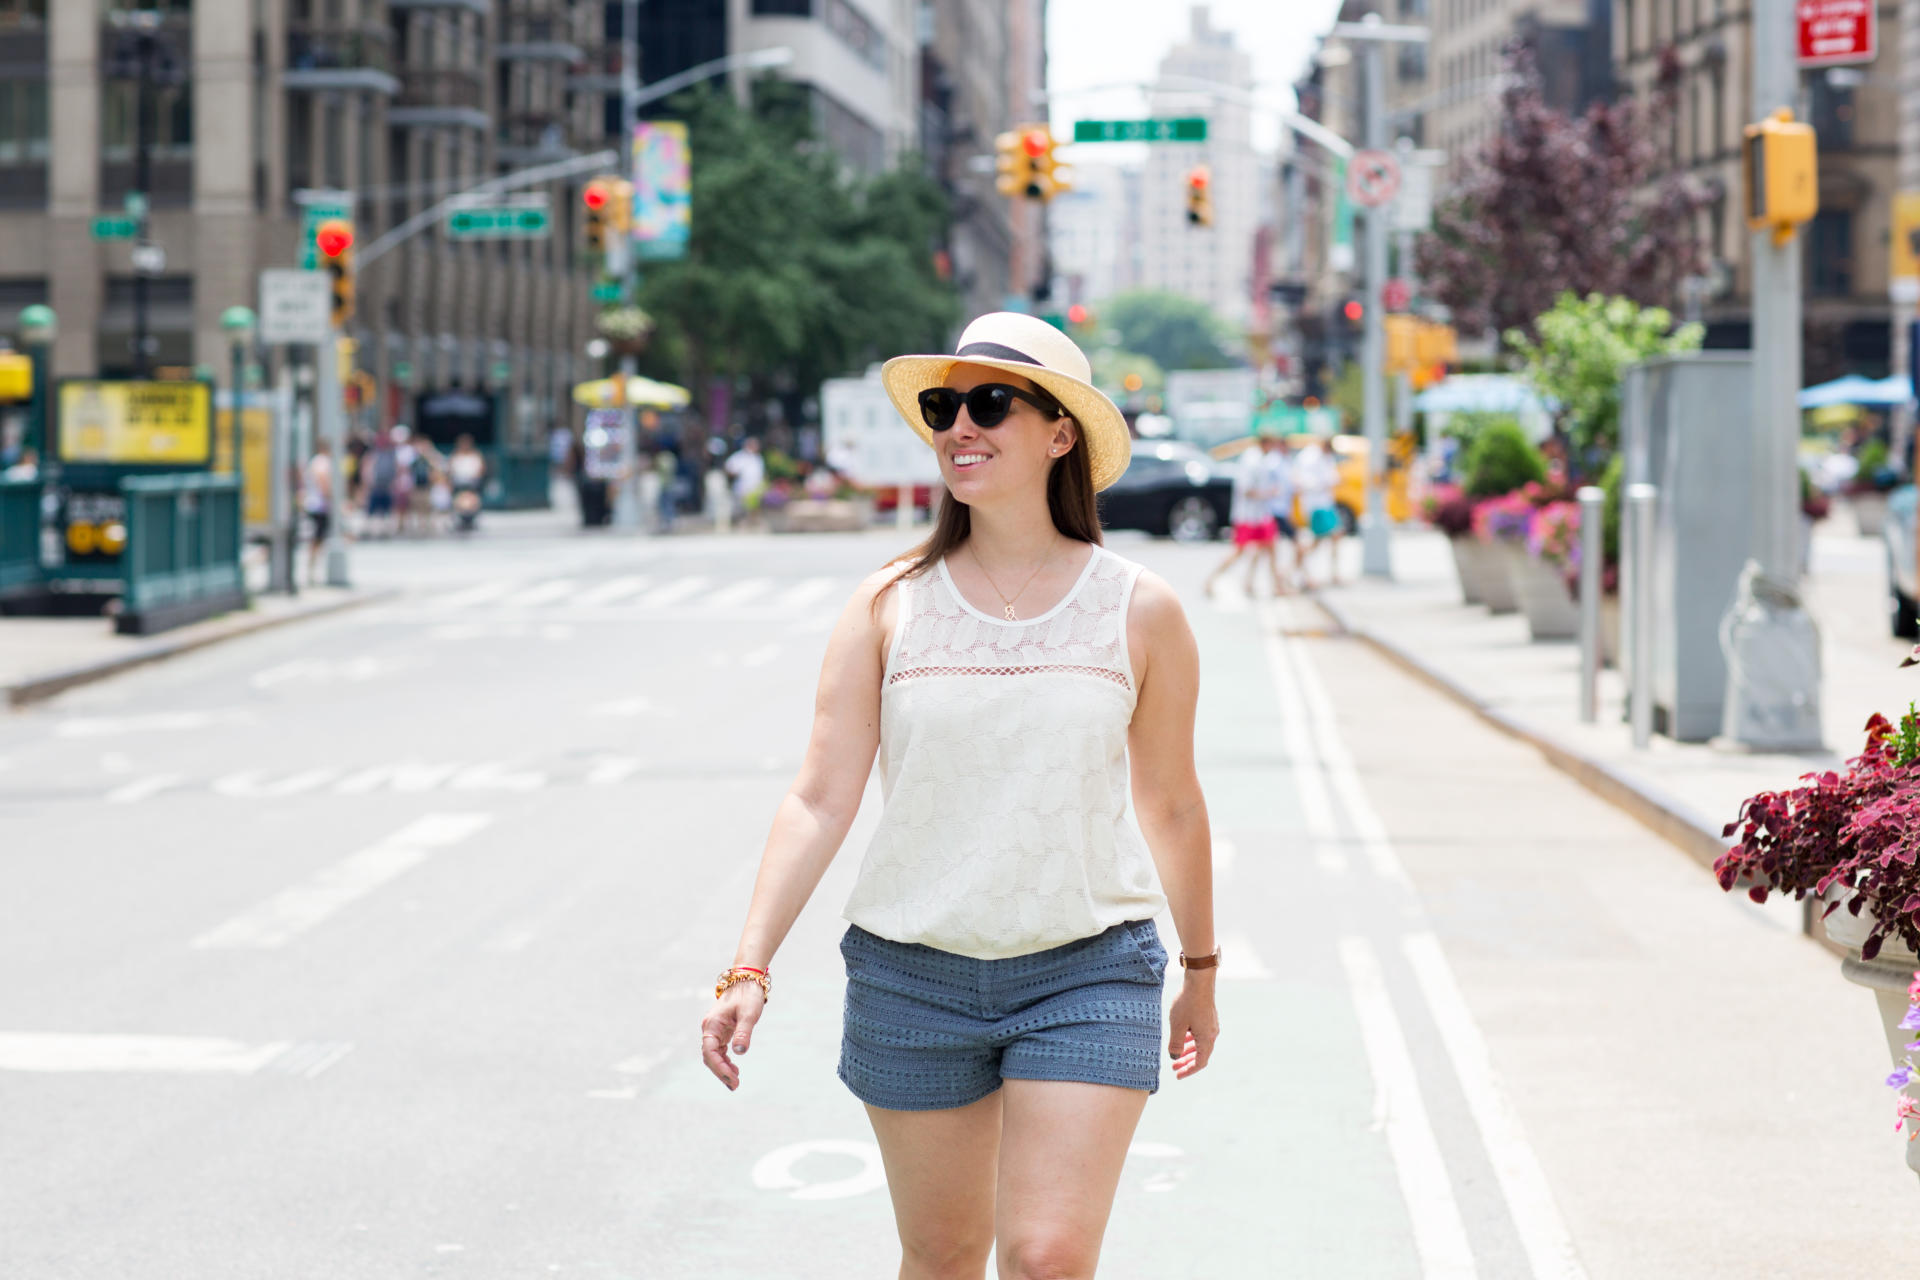 STYLE: A New York City Staycation with Vacay Style